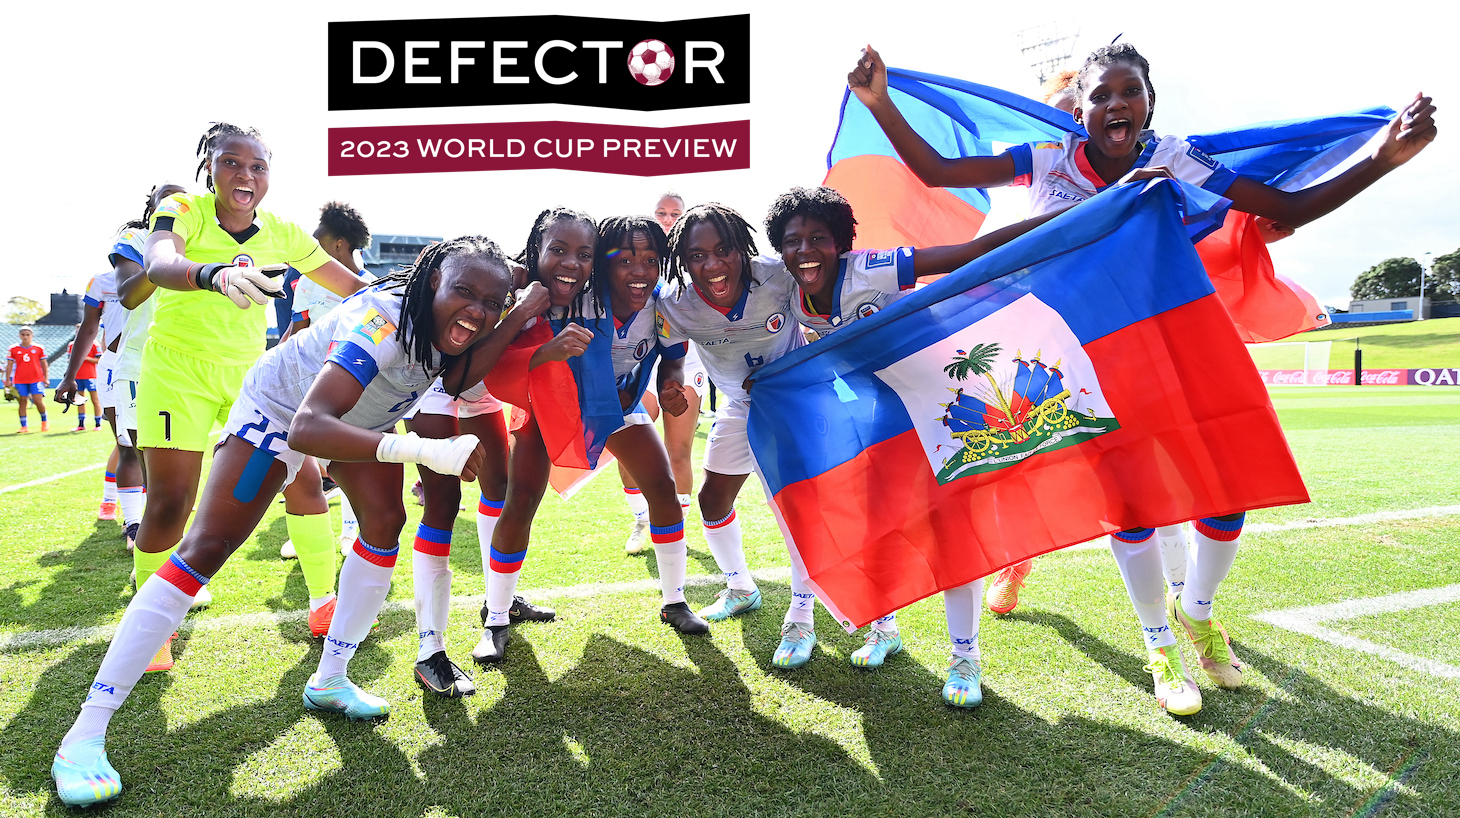 Haiti celebrate qualification for the 2023 FIFA Women's World Cup after their victory in the 2023 FIFA World Cup Play Off Tournament match between Chile and Haiti at North Harbour Stadium on February 22, 2023 in Auckland, New Zealand.